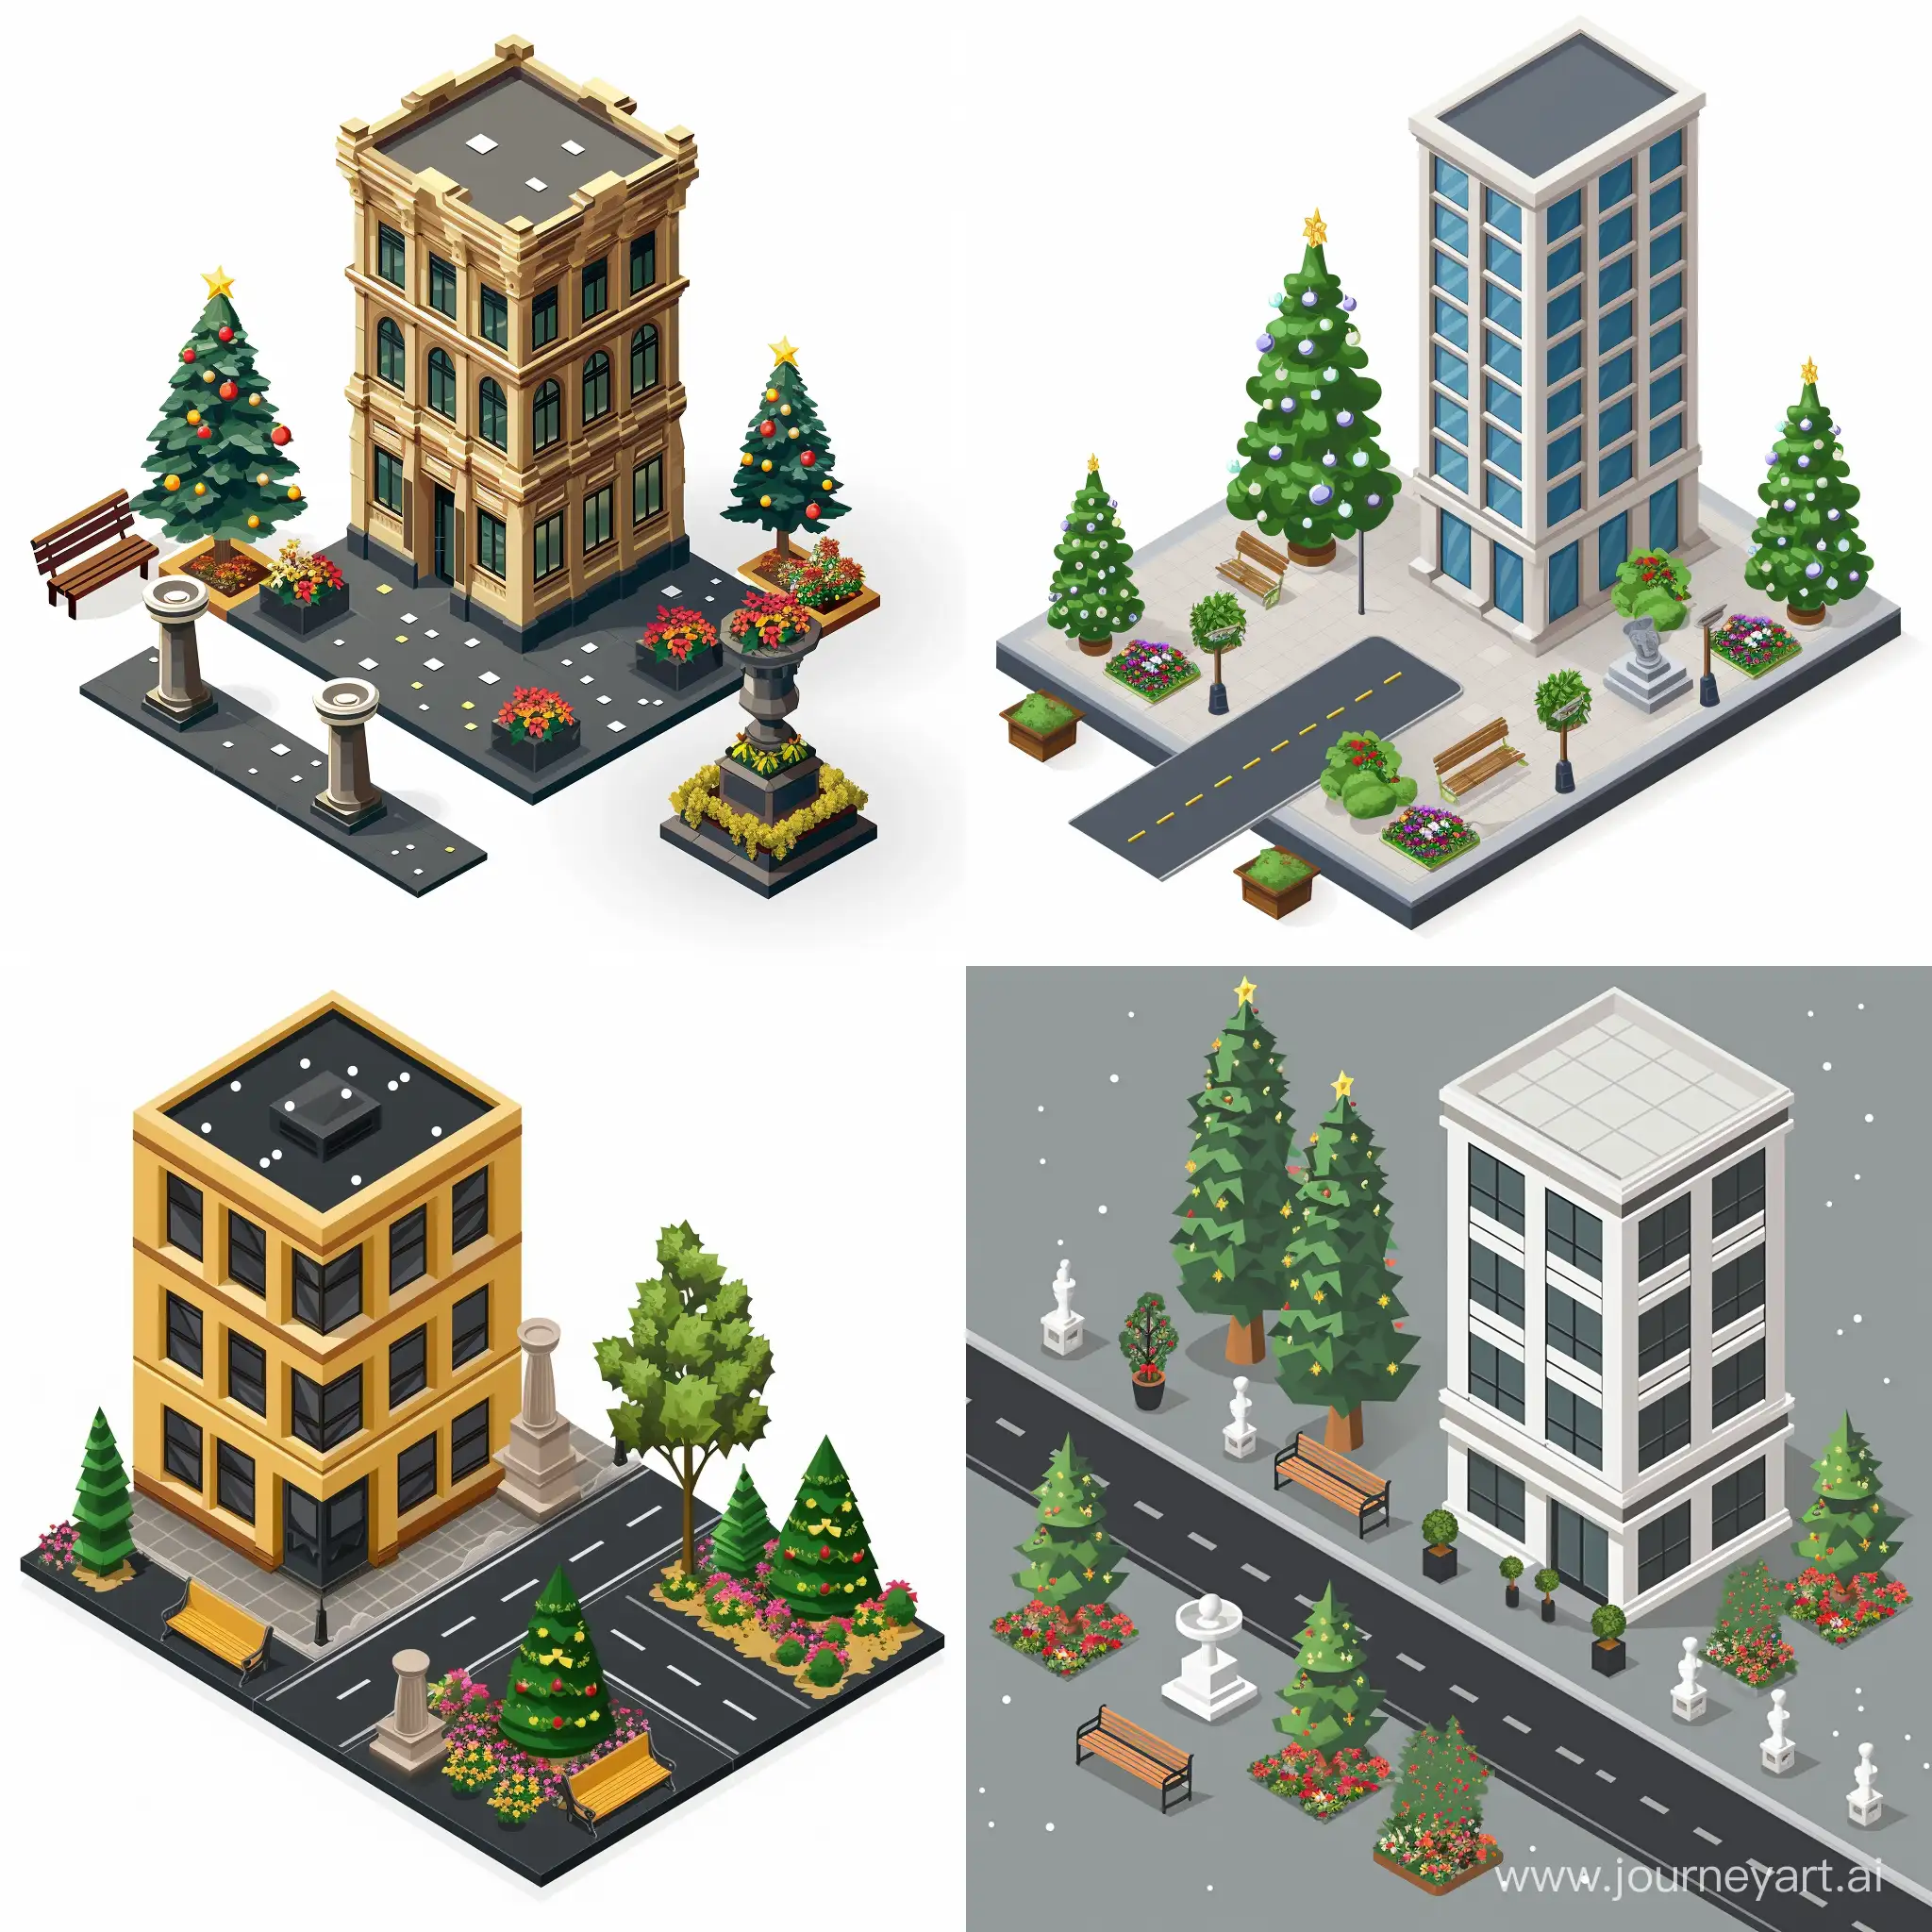 an isometric building in an urban style next to urns, benches, flower beds, trees and Christmas trees. Road. In a minimalist vector style